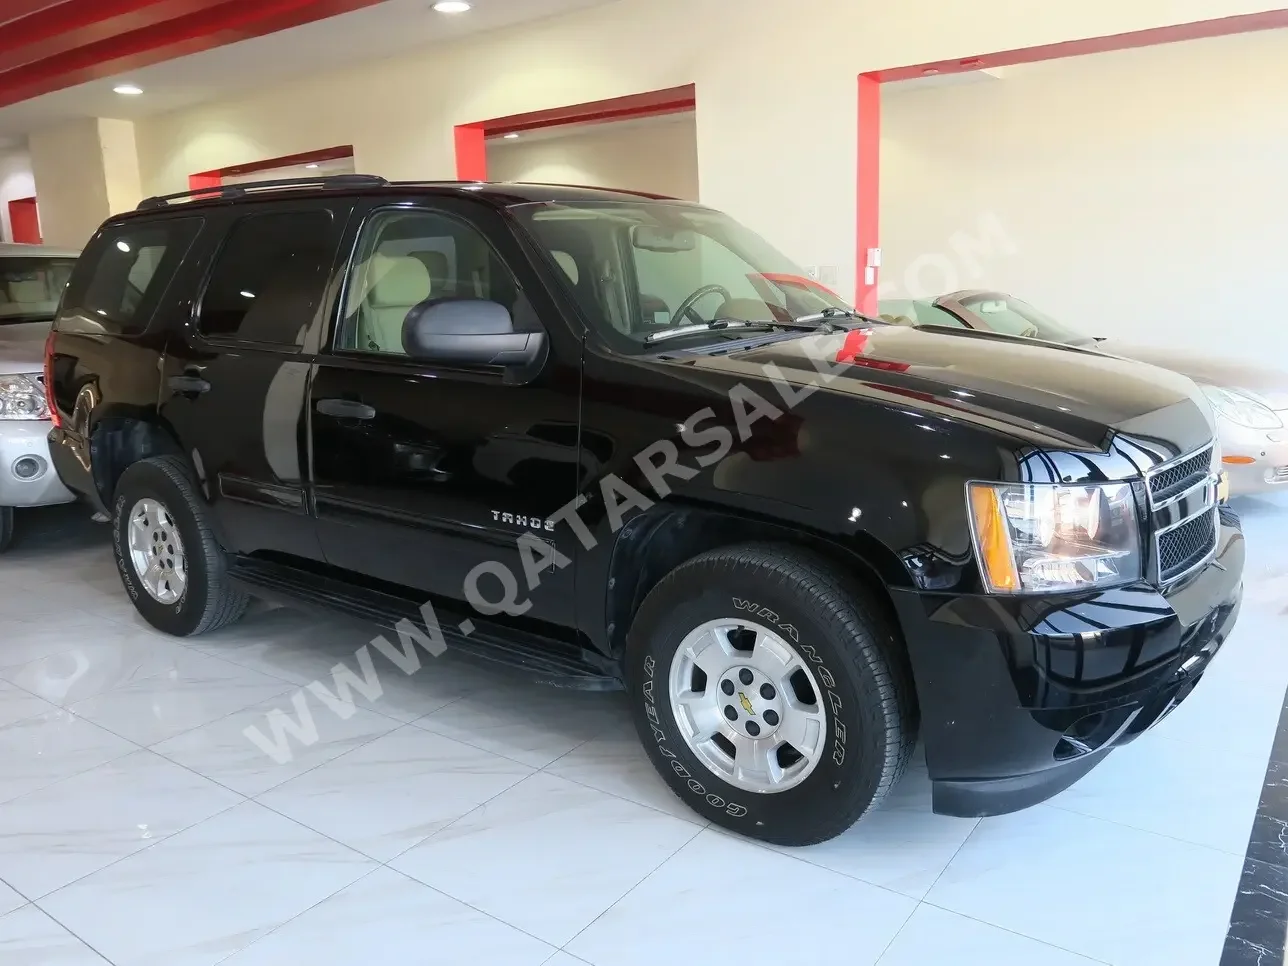 Chevrolet  Tahoe  2012  Automatic  115,000 Km  8 Cylinder  Four Wheel Drive (4WD)  SUV  Black